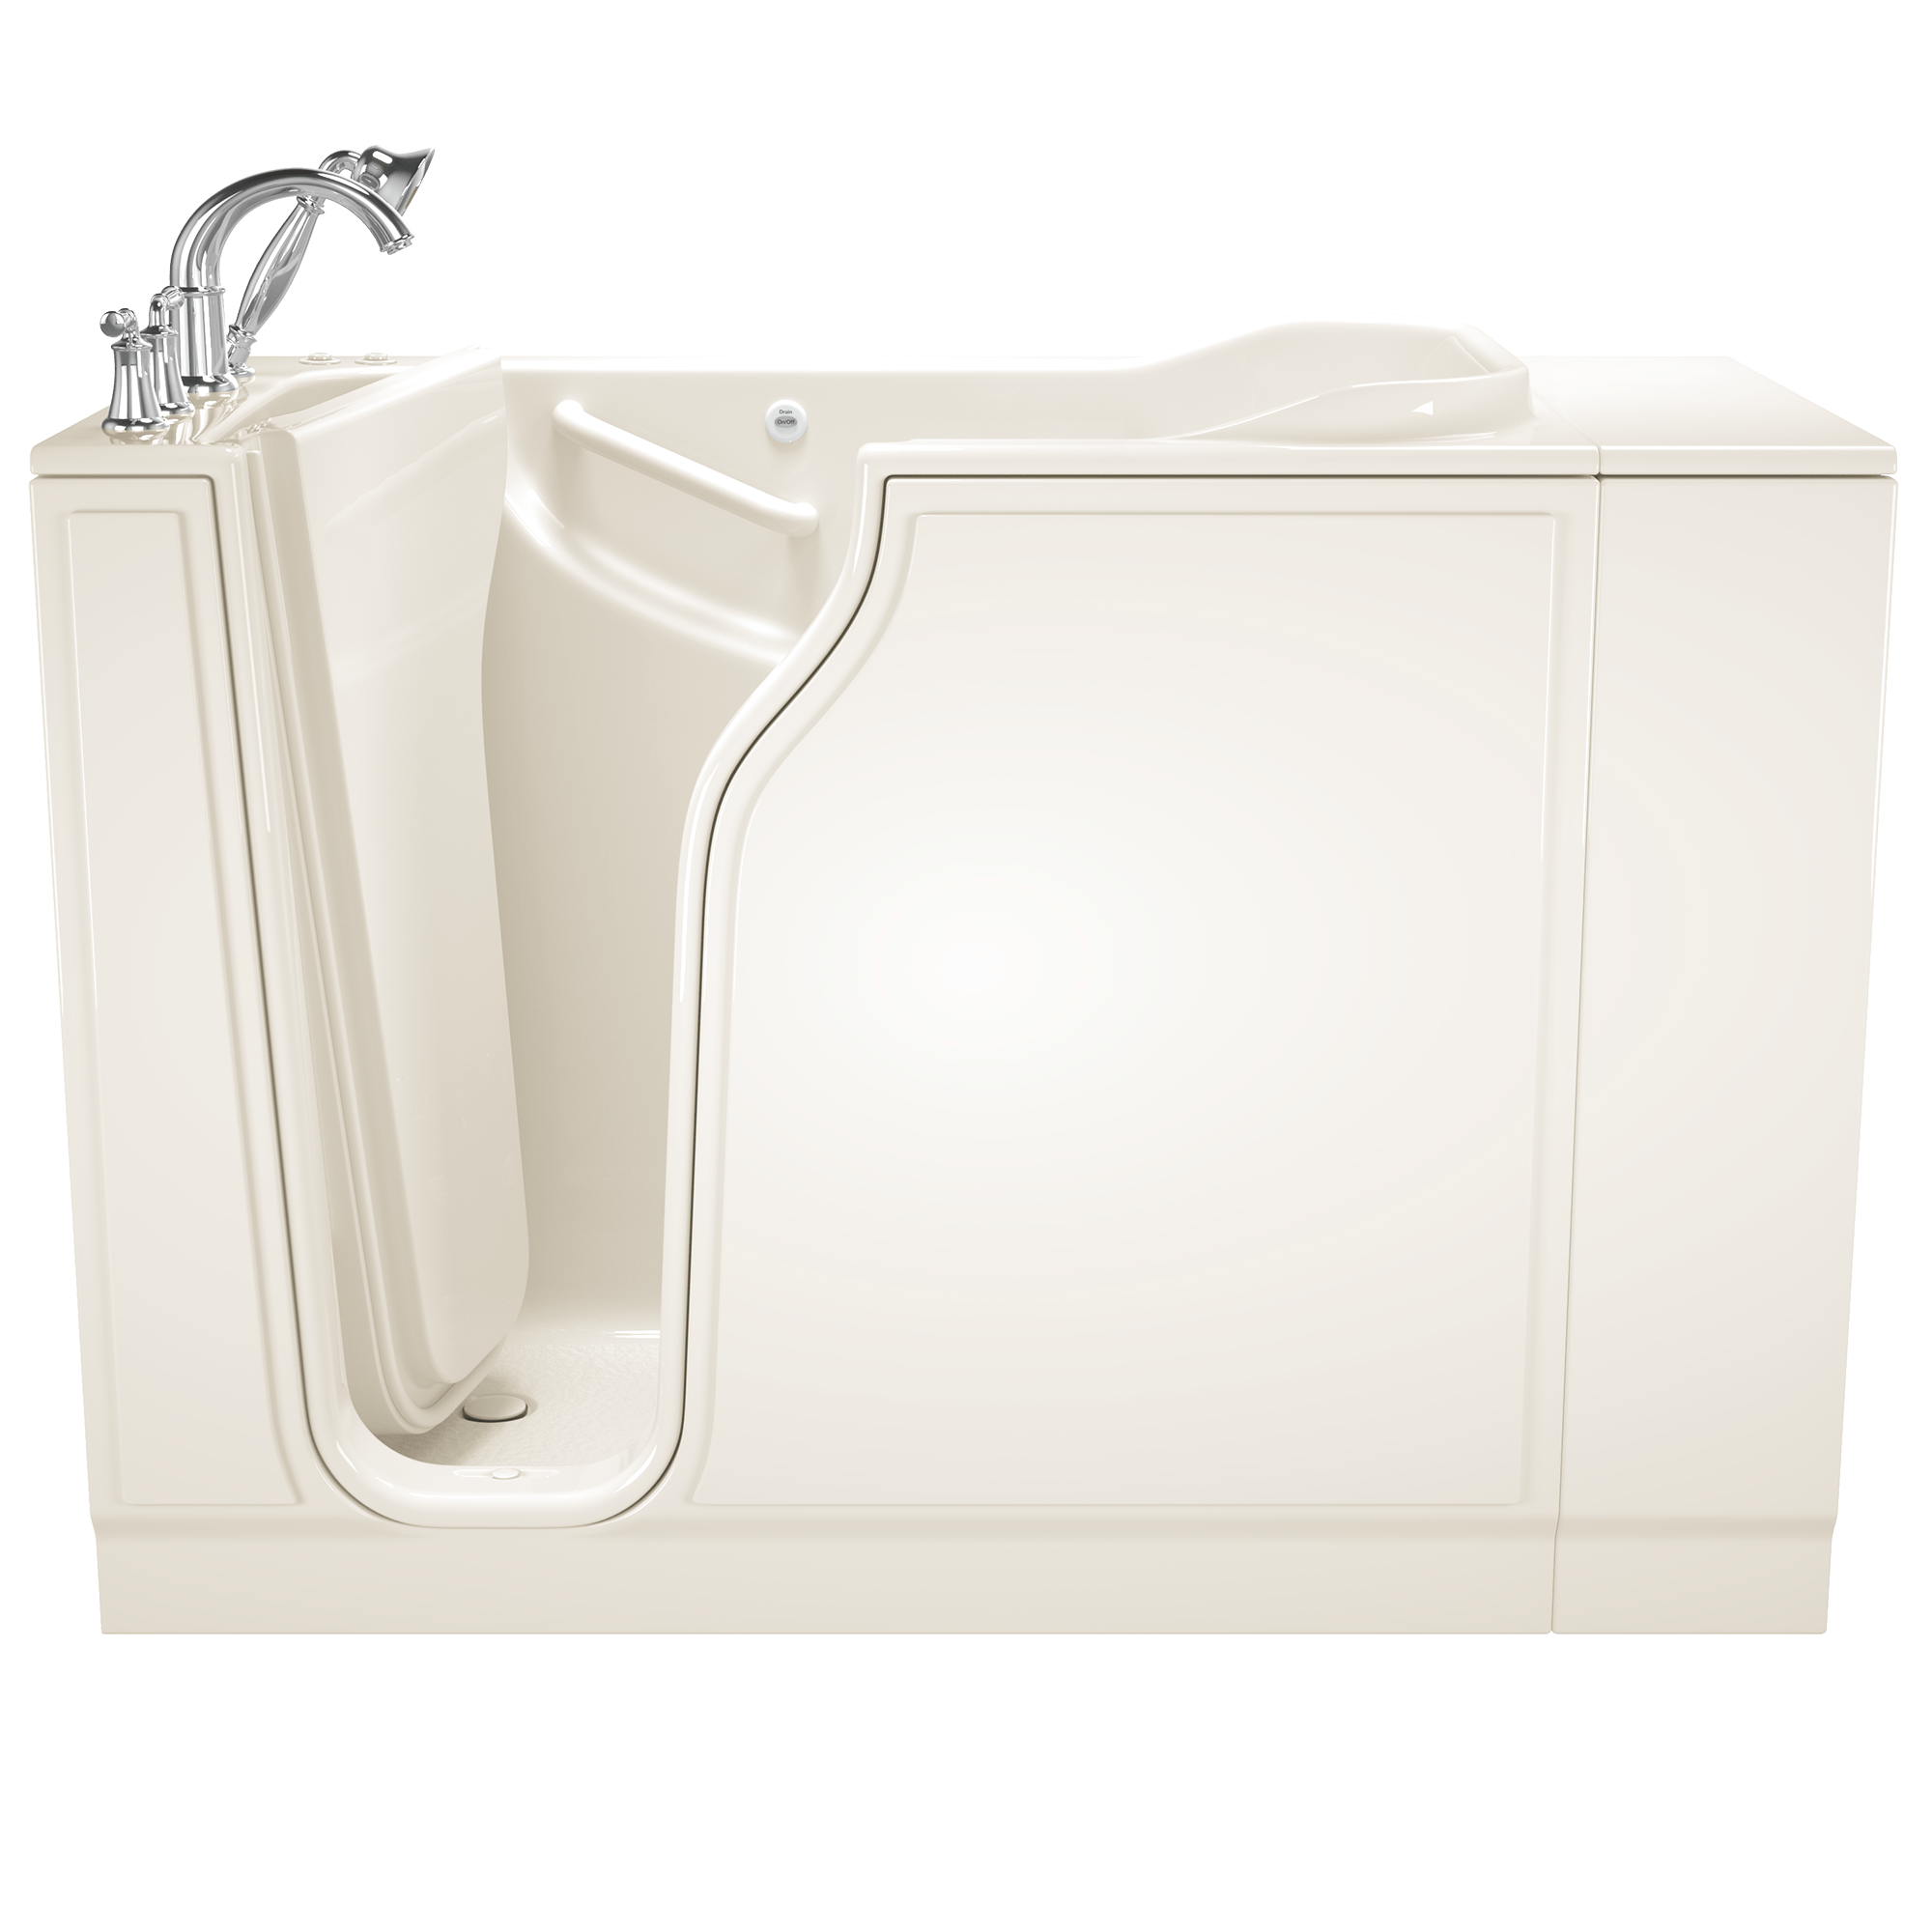 Gelcoat Value Series 30x52 Inch Walk-In Bathtub with Combination Air Spa system and Whirlpool Massage System - Left Hand Door and Drain